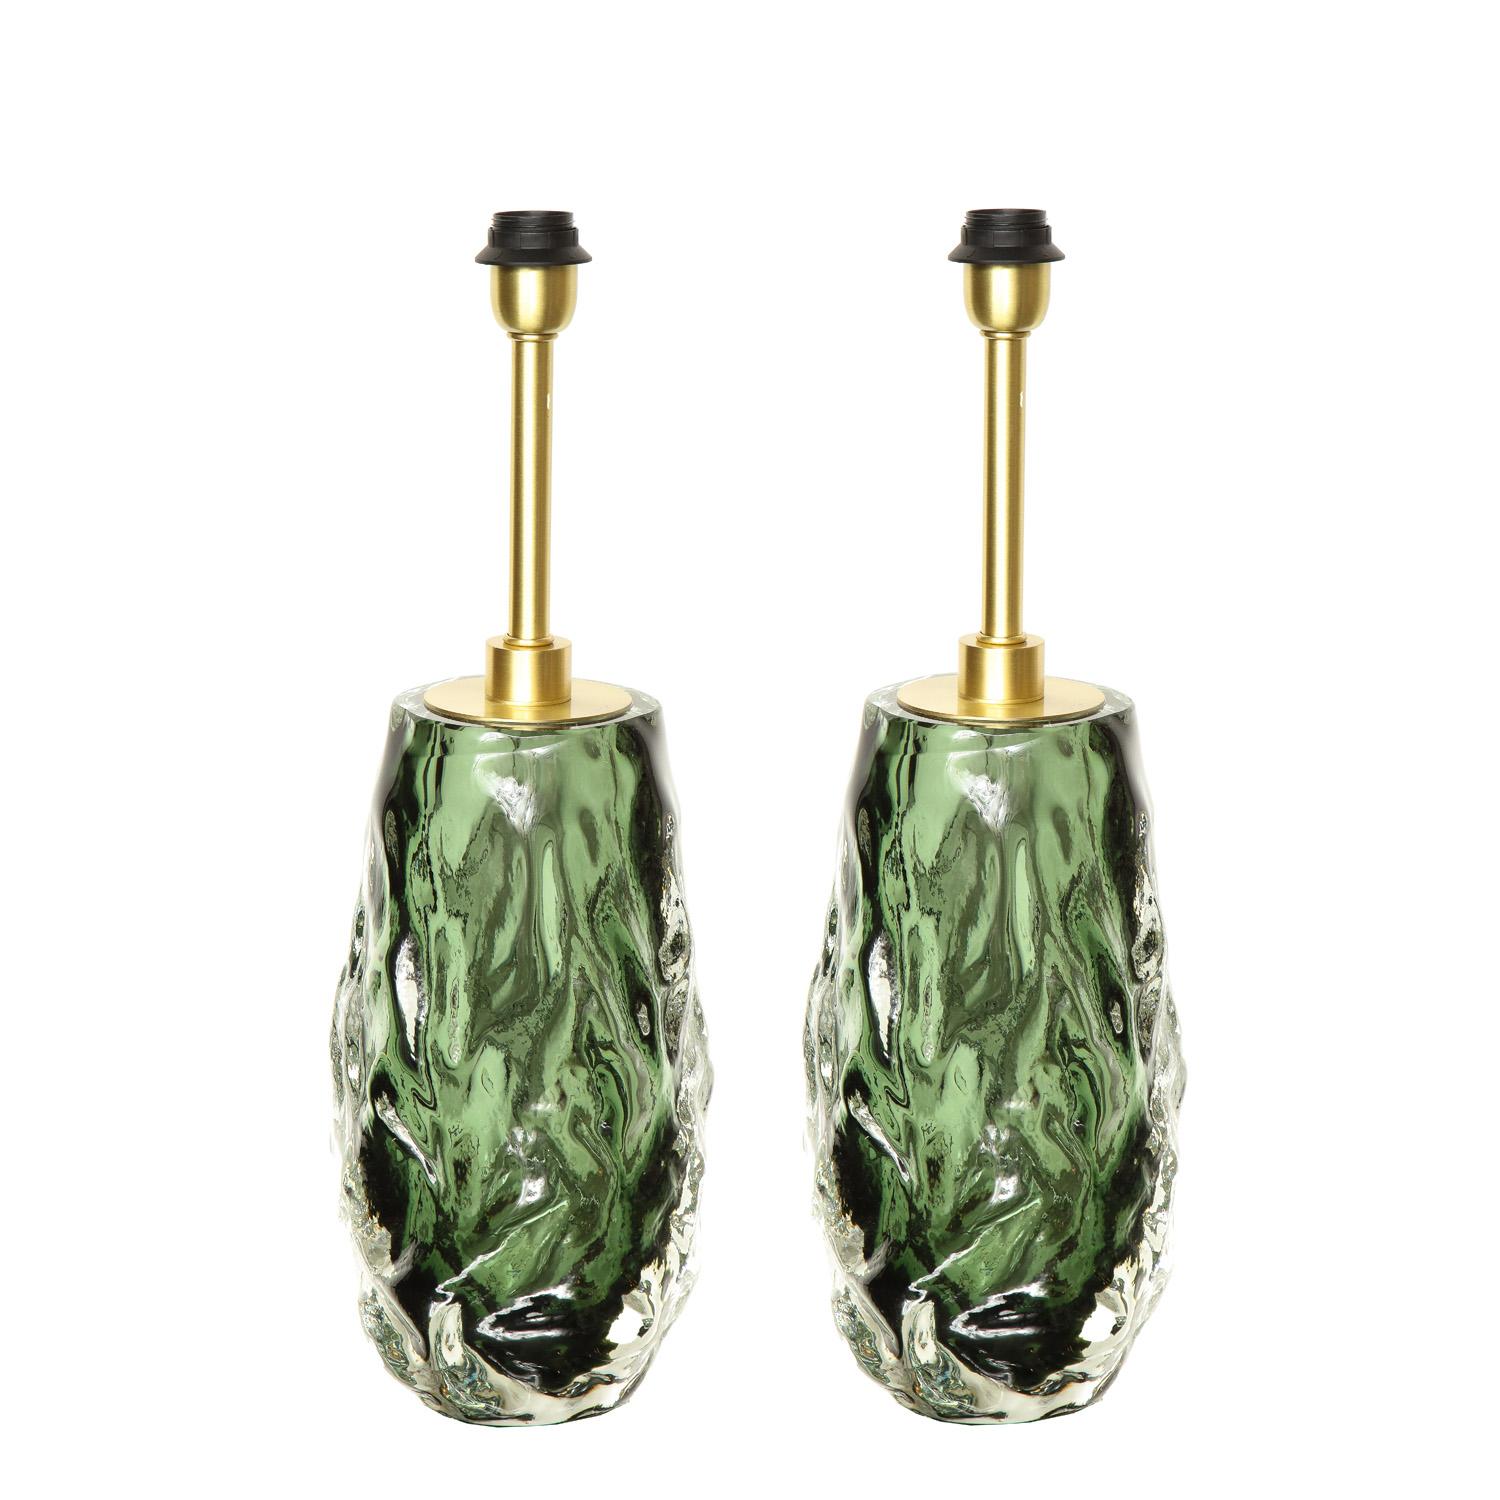 Elegant pair of hand-blown Murano sommerso emerald and clear glass table lamps with brass fittings. Italy.

These lamps are available in different glass colors by special order. Please enquire for availability. Lead time 5-6 weeks. 

Shades sold